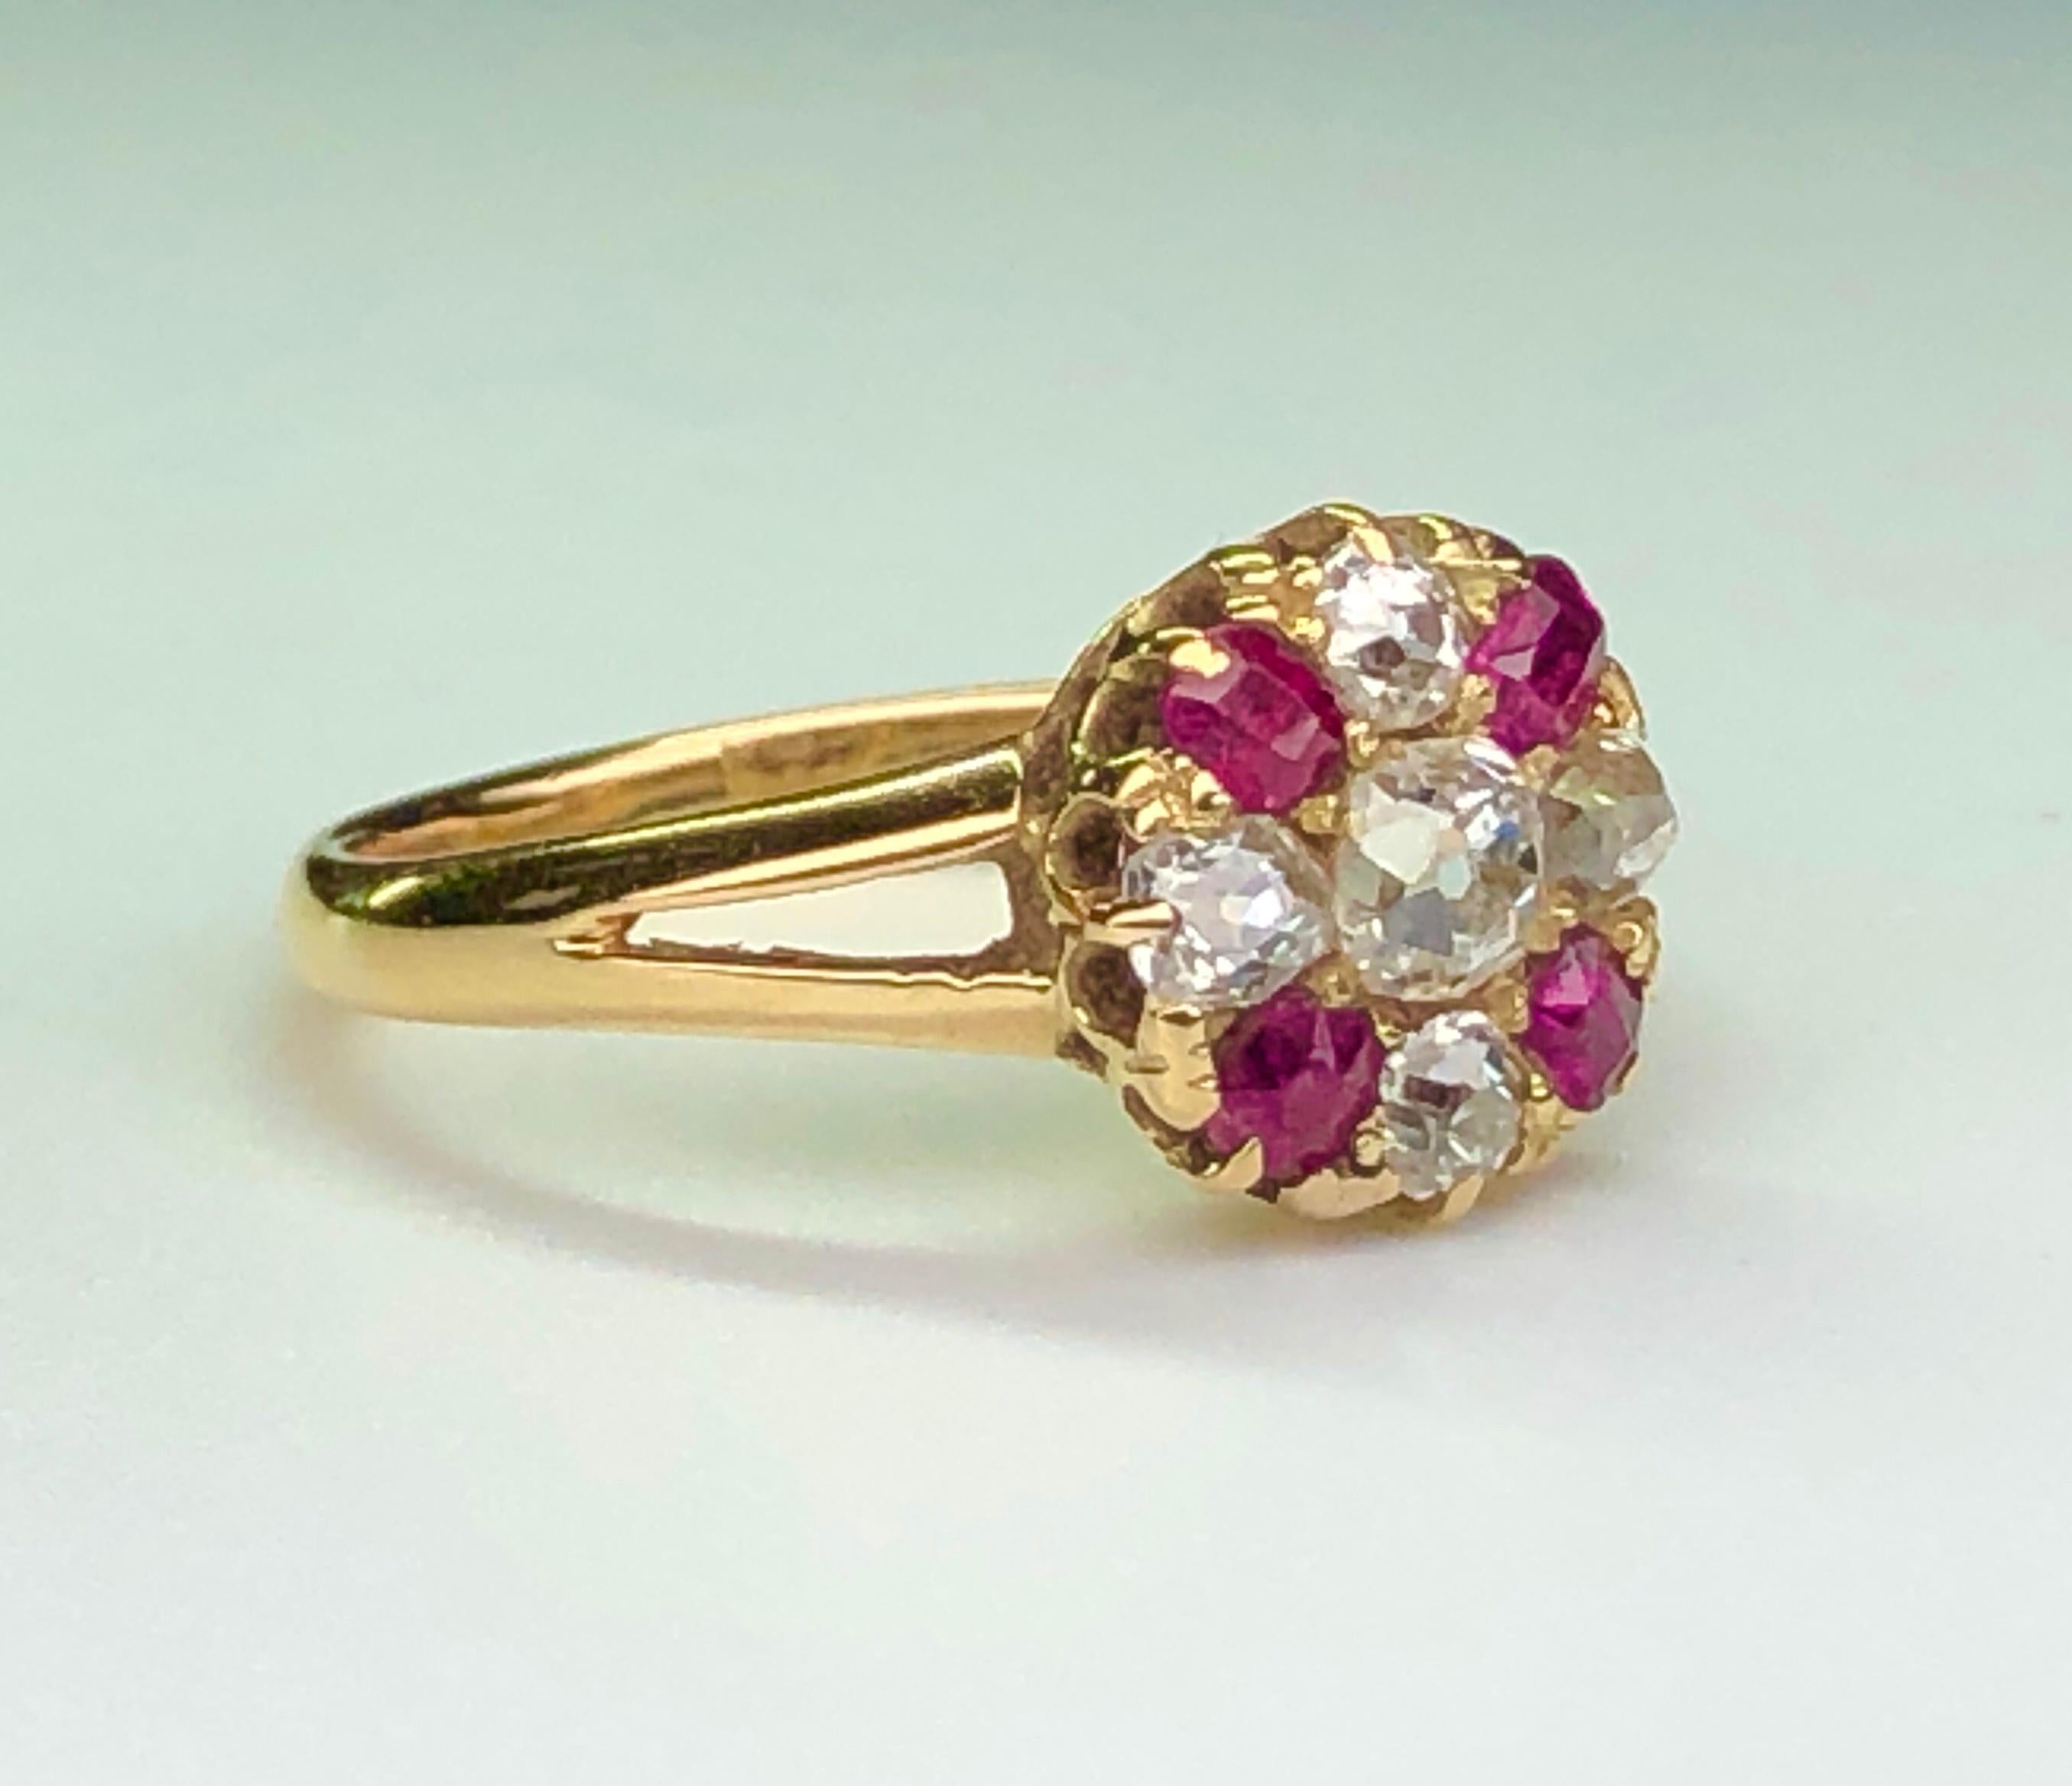 A fine Victorian ring in 18K gold. The central old-cut diamond of approximately 0.2 carats, mounted in claws,  the center stone set well within a border of old cut diamonds and cushion-cut rubies. The ring is in yellow claw settings, to a